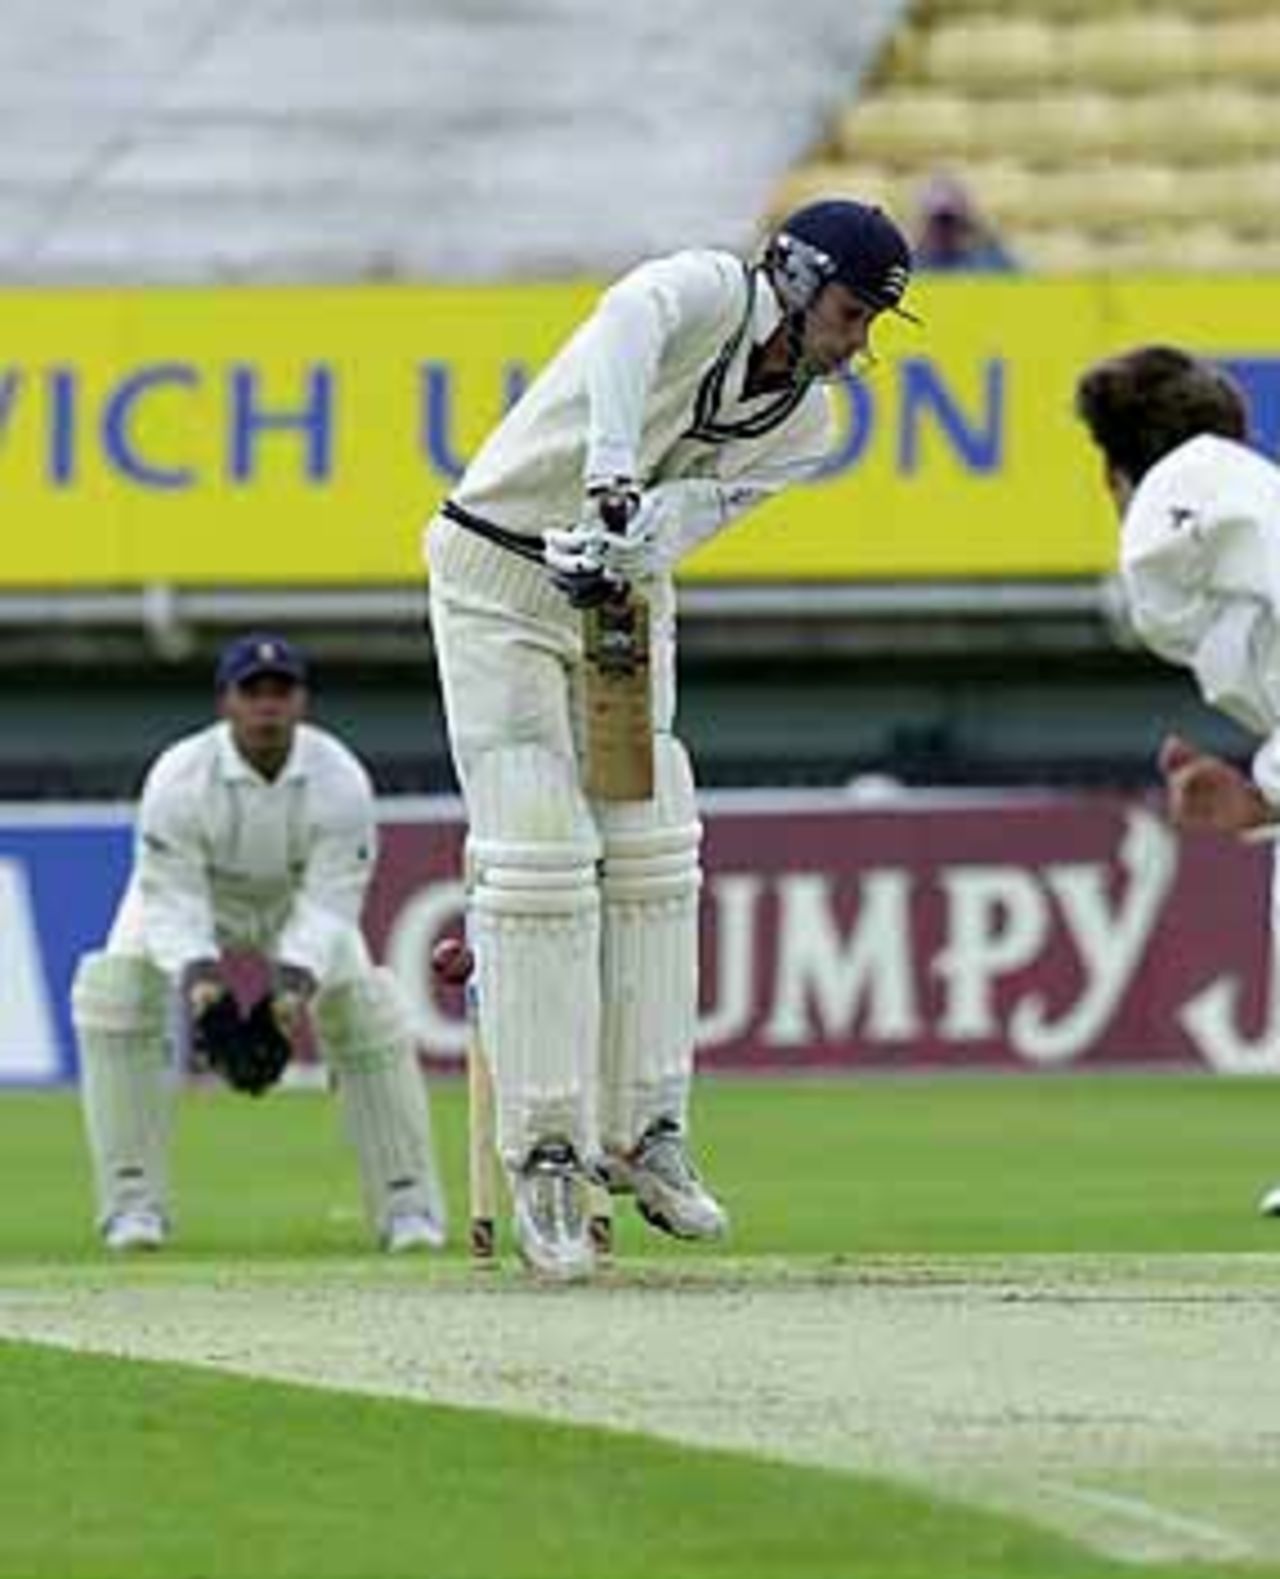 Middlesex batsman Stephen Fleming is hurried up by a Melvyn Betts delivery at Edgbaston